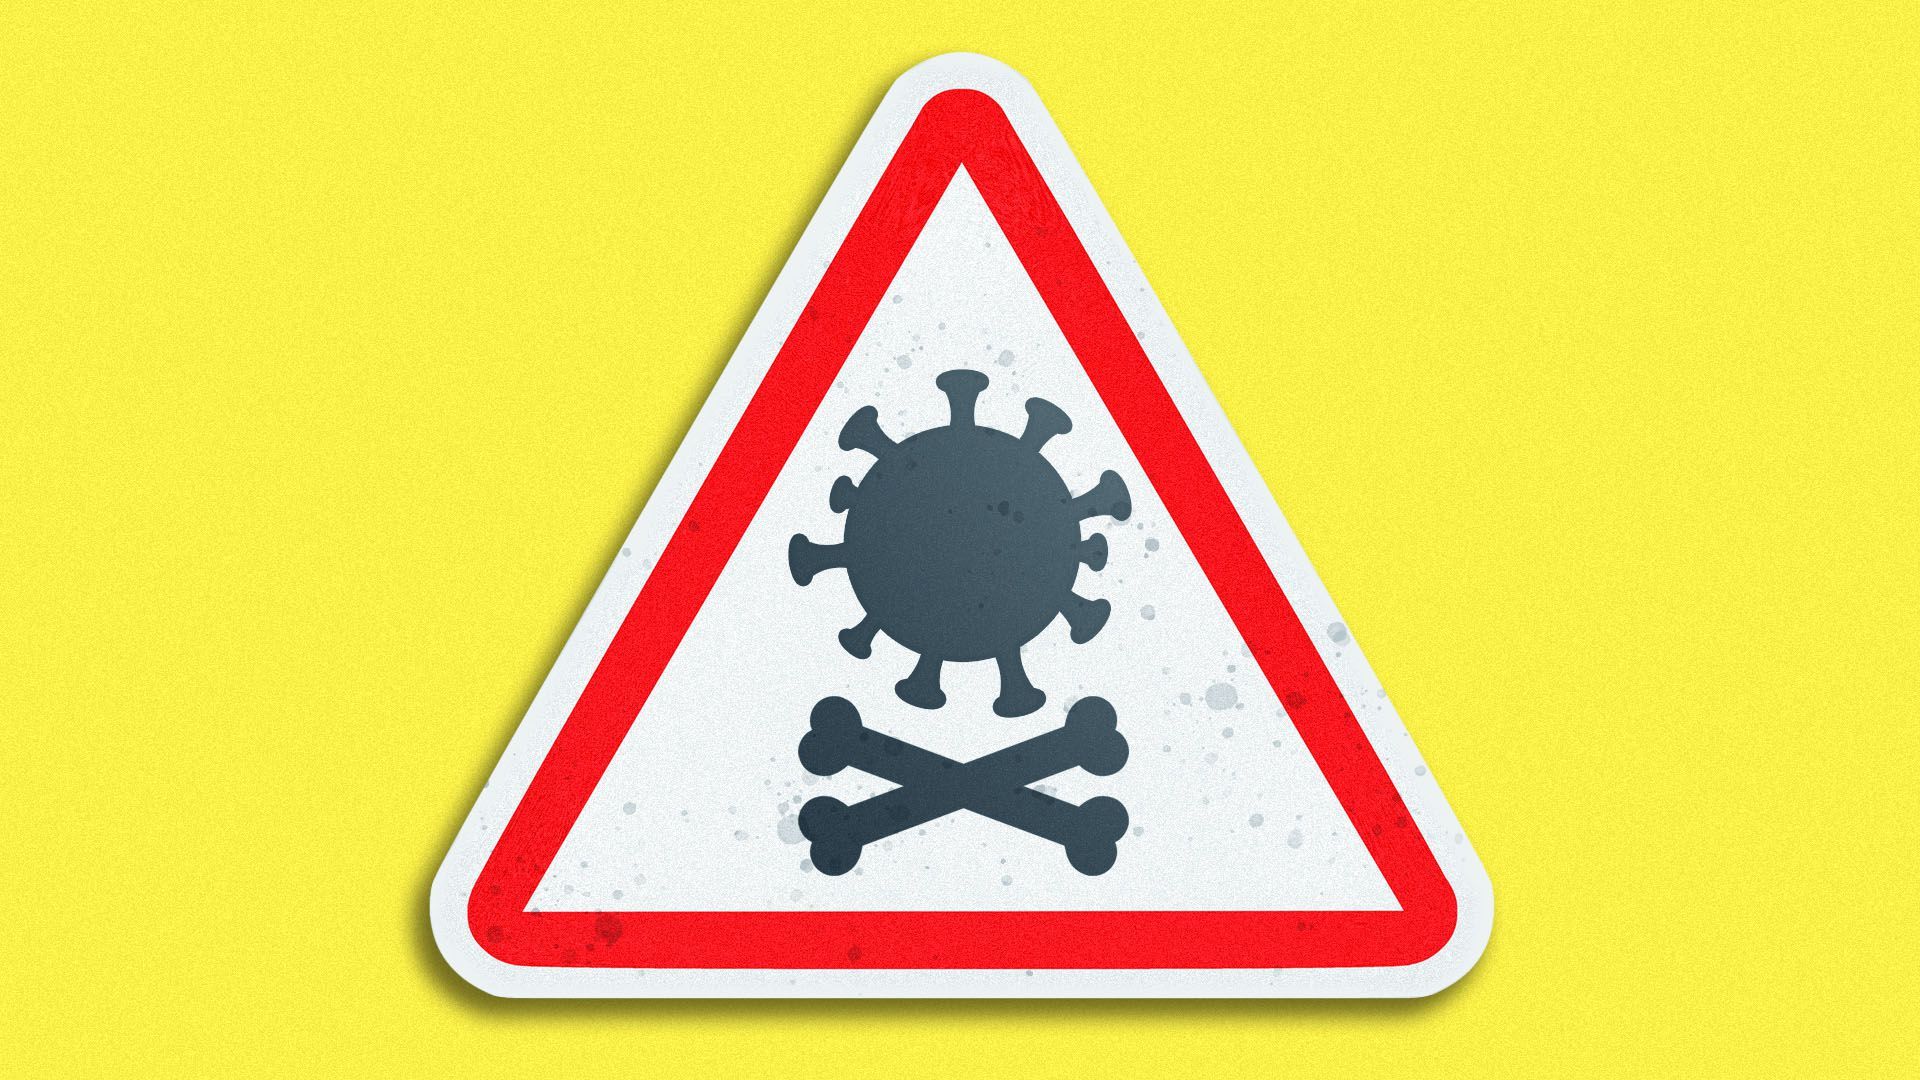 Illustration of a street sign featuring a skulls and bones with a virus icon in place of the skull